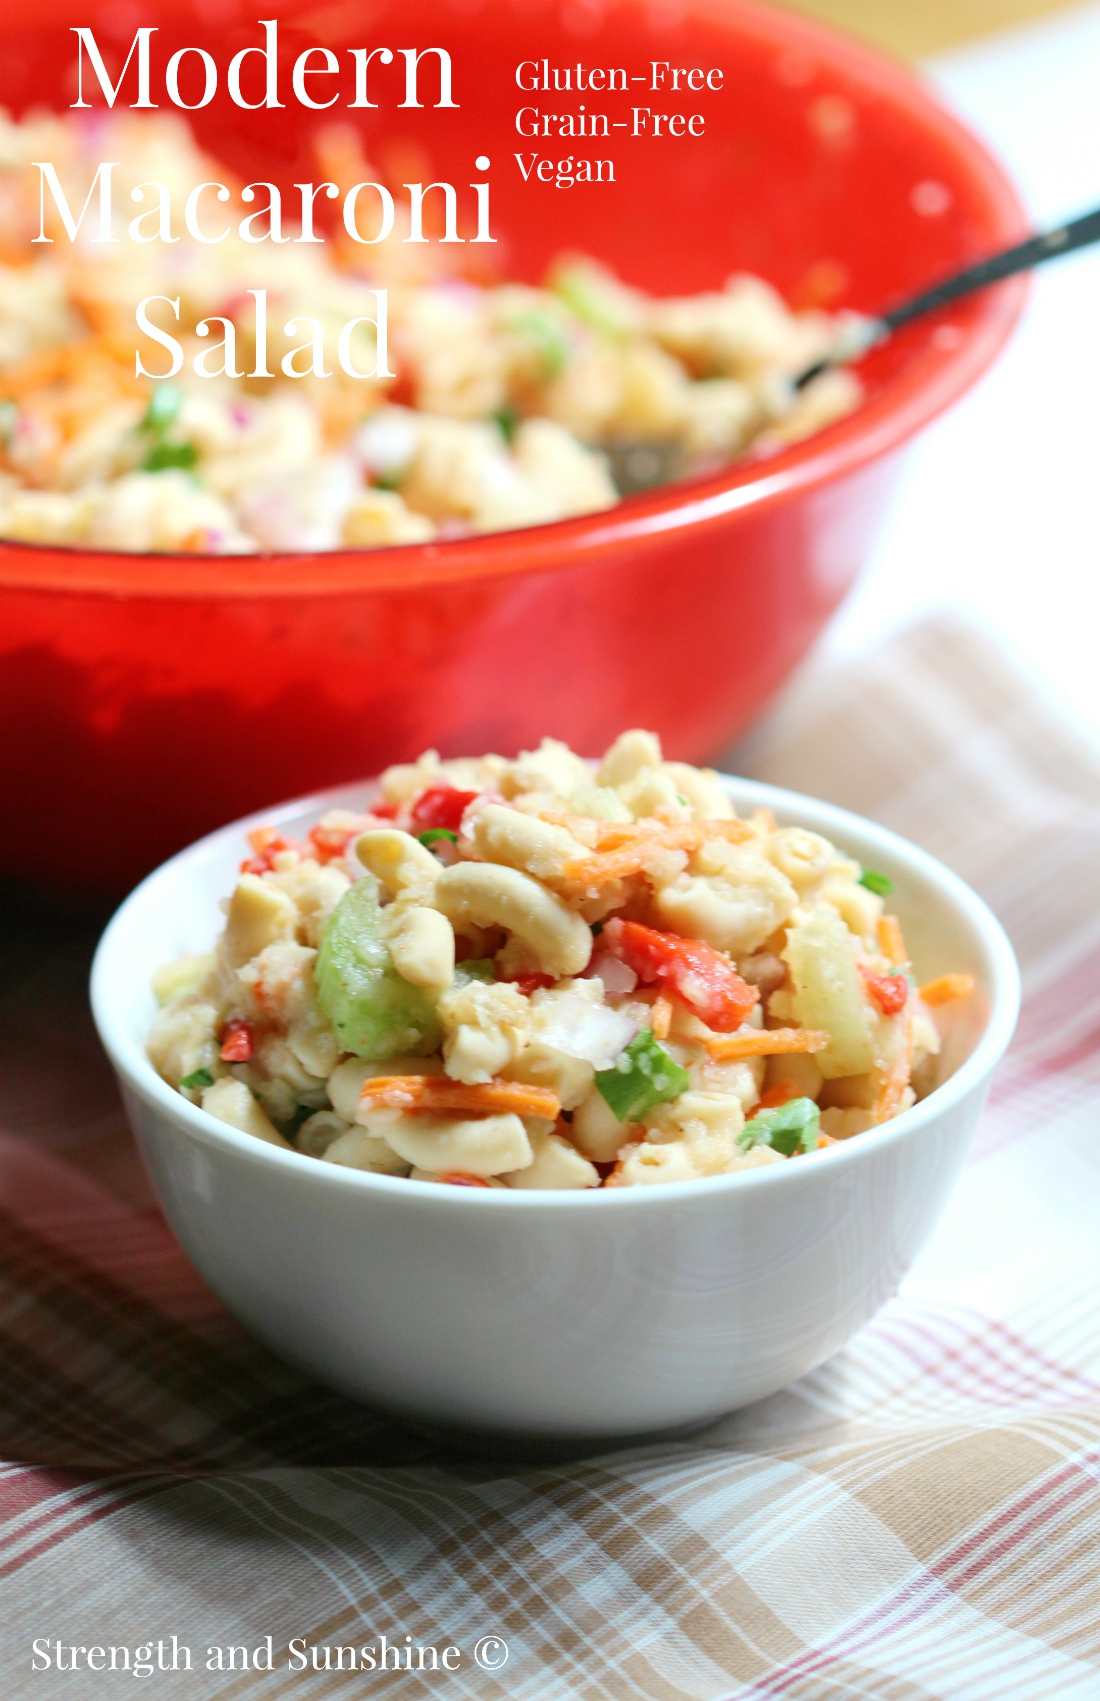 Modern Macaroni Salad | Strength and Sunshine @RebeccaGF666 A modern take on the classic to healthify your summer. Magically grain-free & gluten-free macaroni mixed with fresh summer veggies and a creamy vegan veggie based puree to kick the mayo to the side!